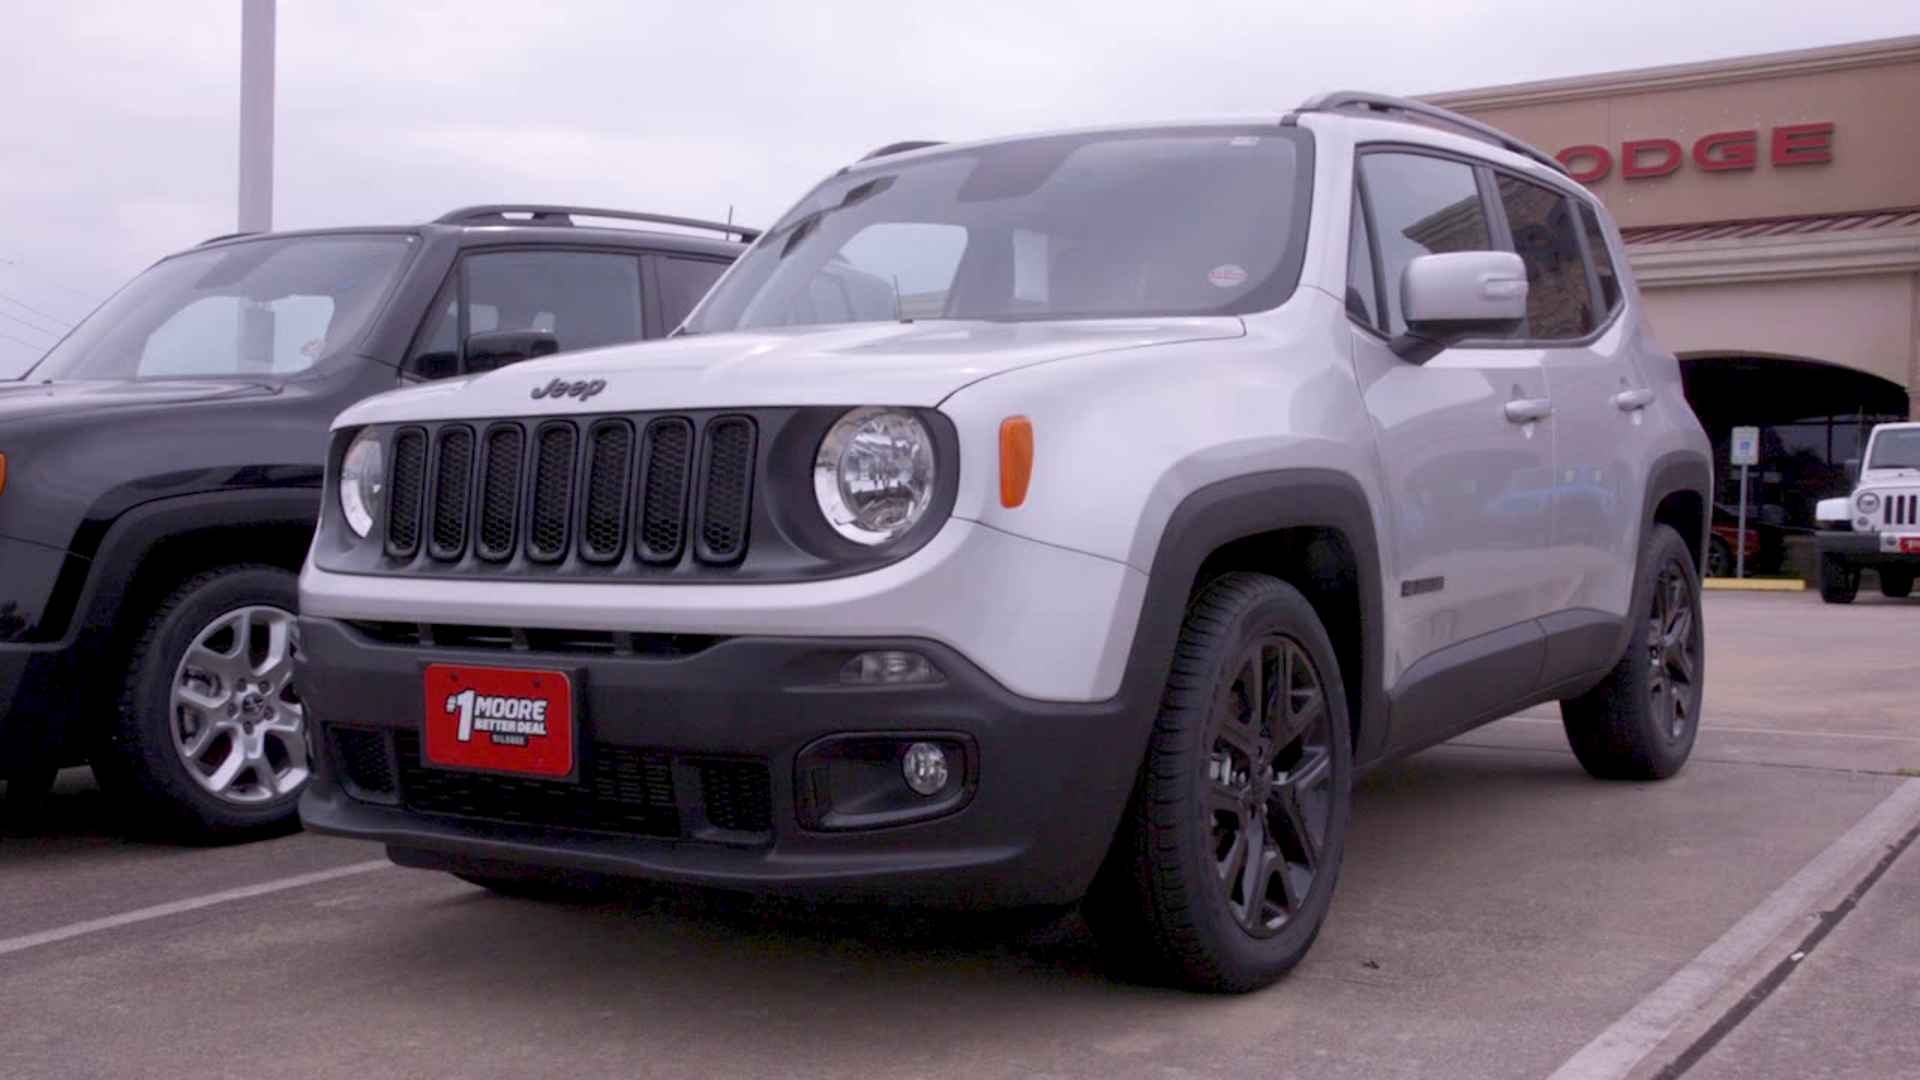 Today we took a 2018 Jeep Renegade Limited Edition out for a spin. Call Moore Chrysler Dodge Jeep Ram in Silsbee at (409) 385-3796 or visit them at http://1MooreCDJR.com to get yours!